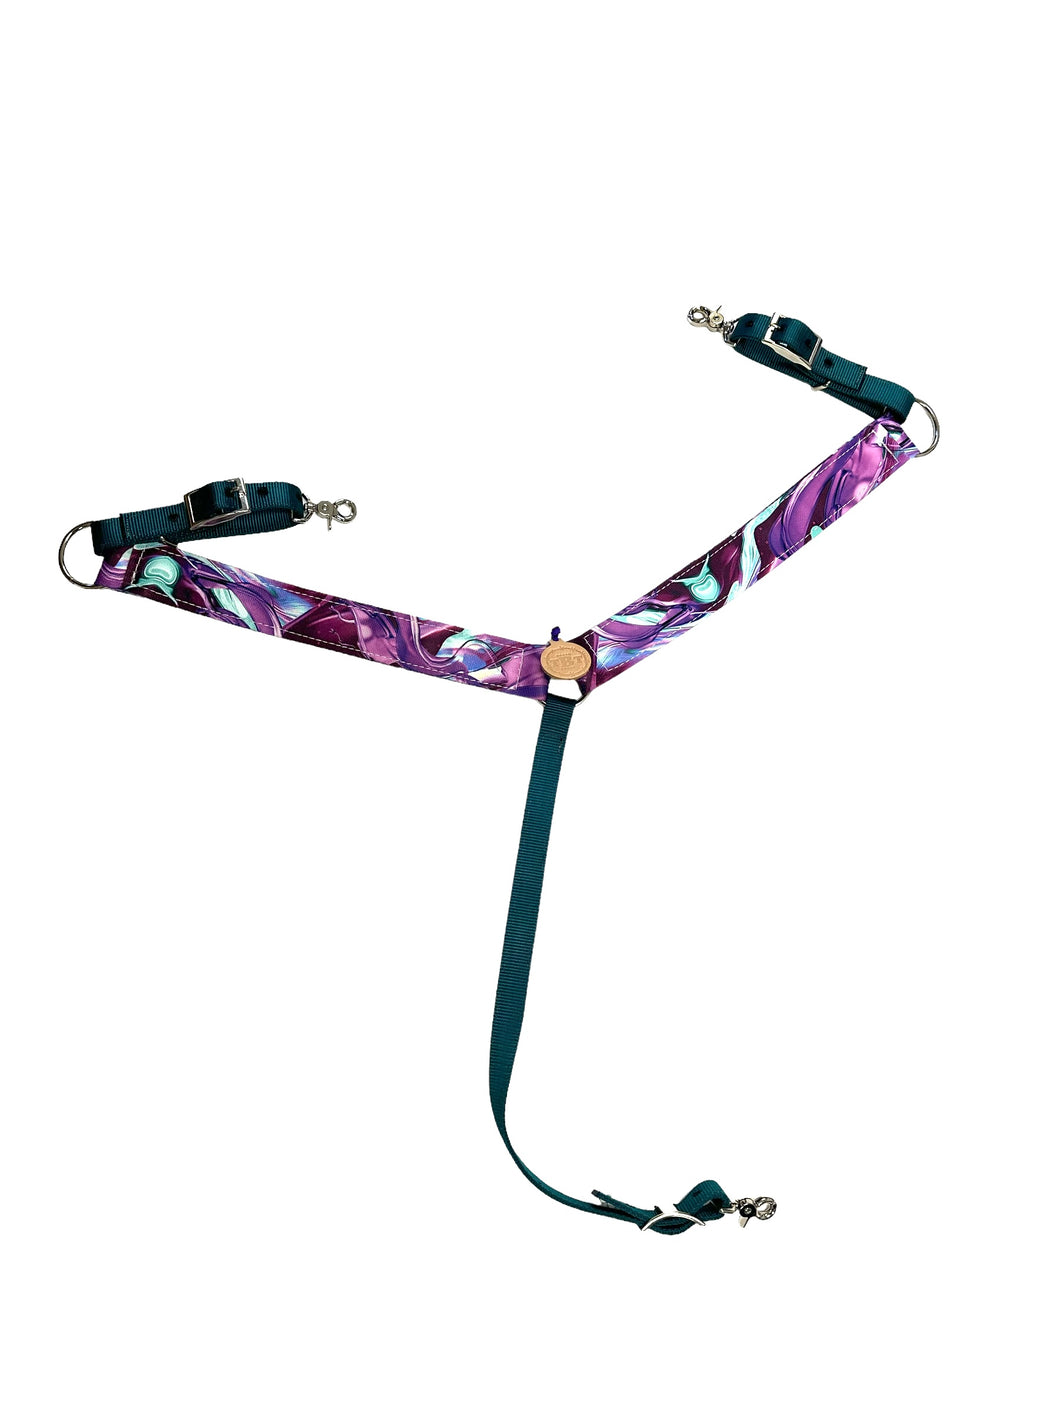 Purple and teal breast collar nylon horse size